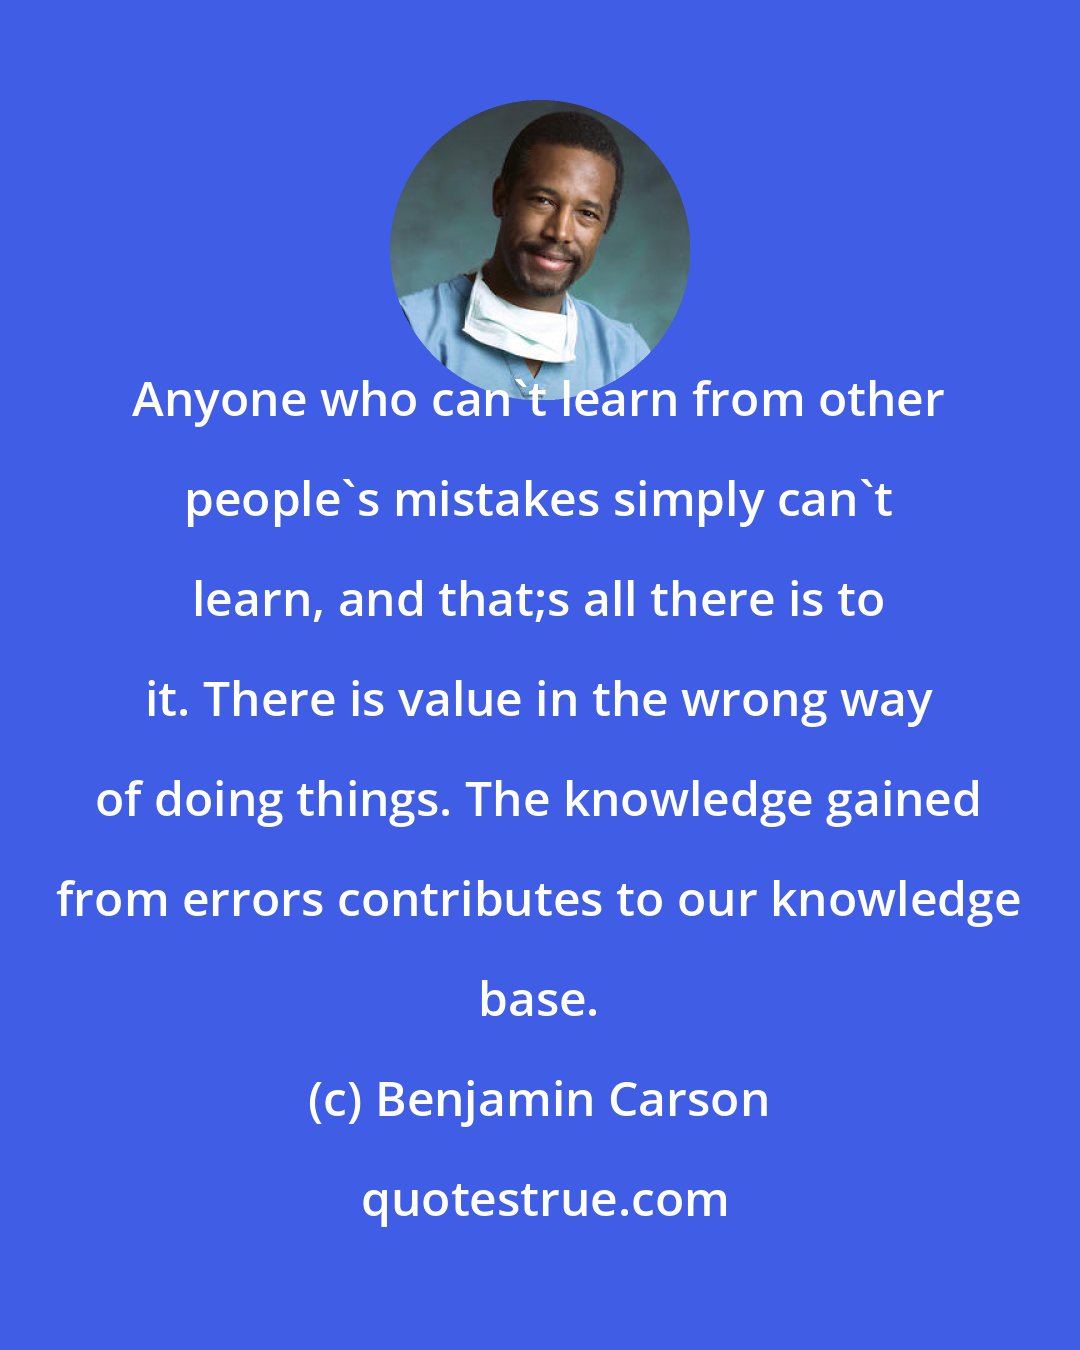 Benjamin Carson: Anyone who can't learn from other people's mistakes simply can't learn, and that;s all there is to it. There is value in the wrong way of doing things. The knowledge gained from errors contributes to our knowledge base.